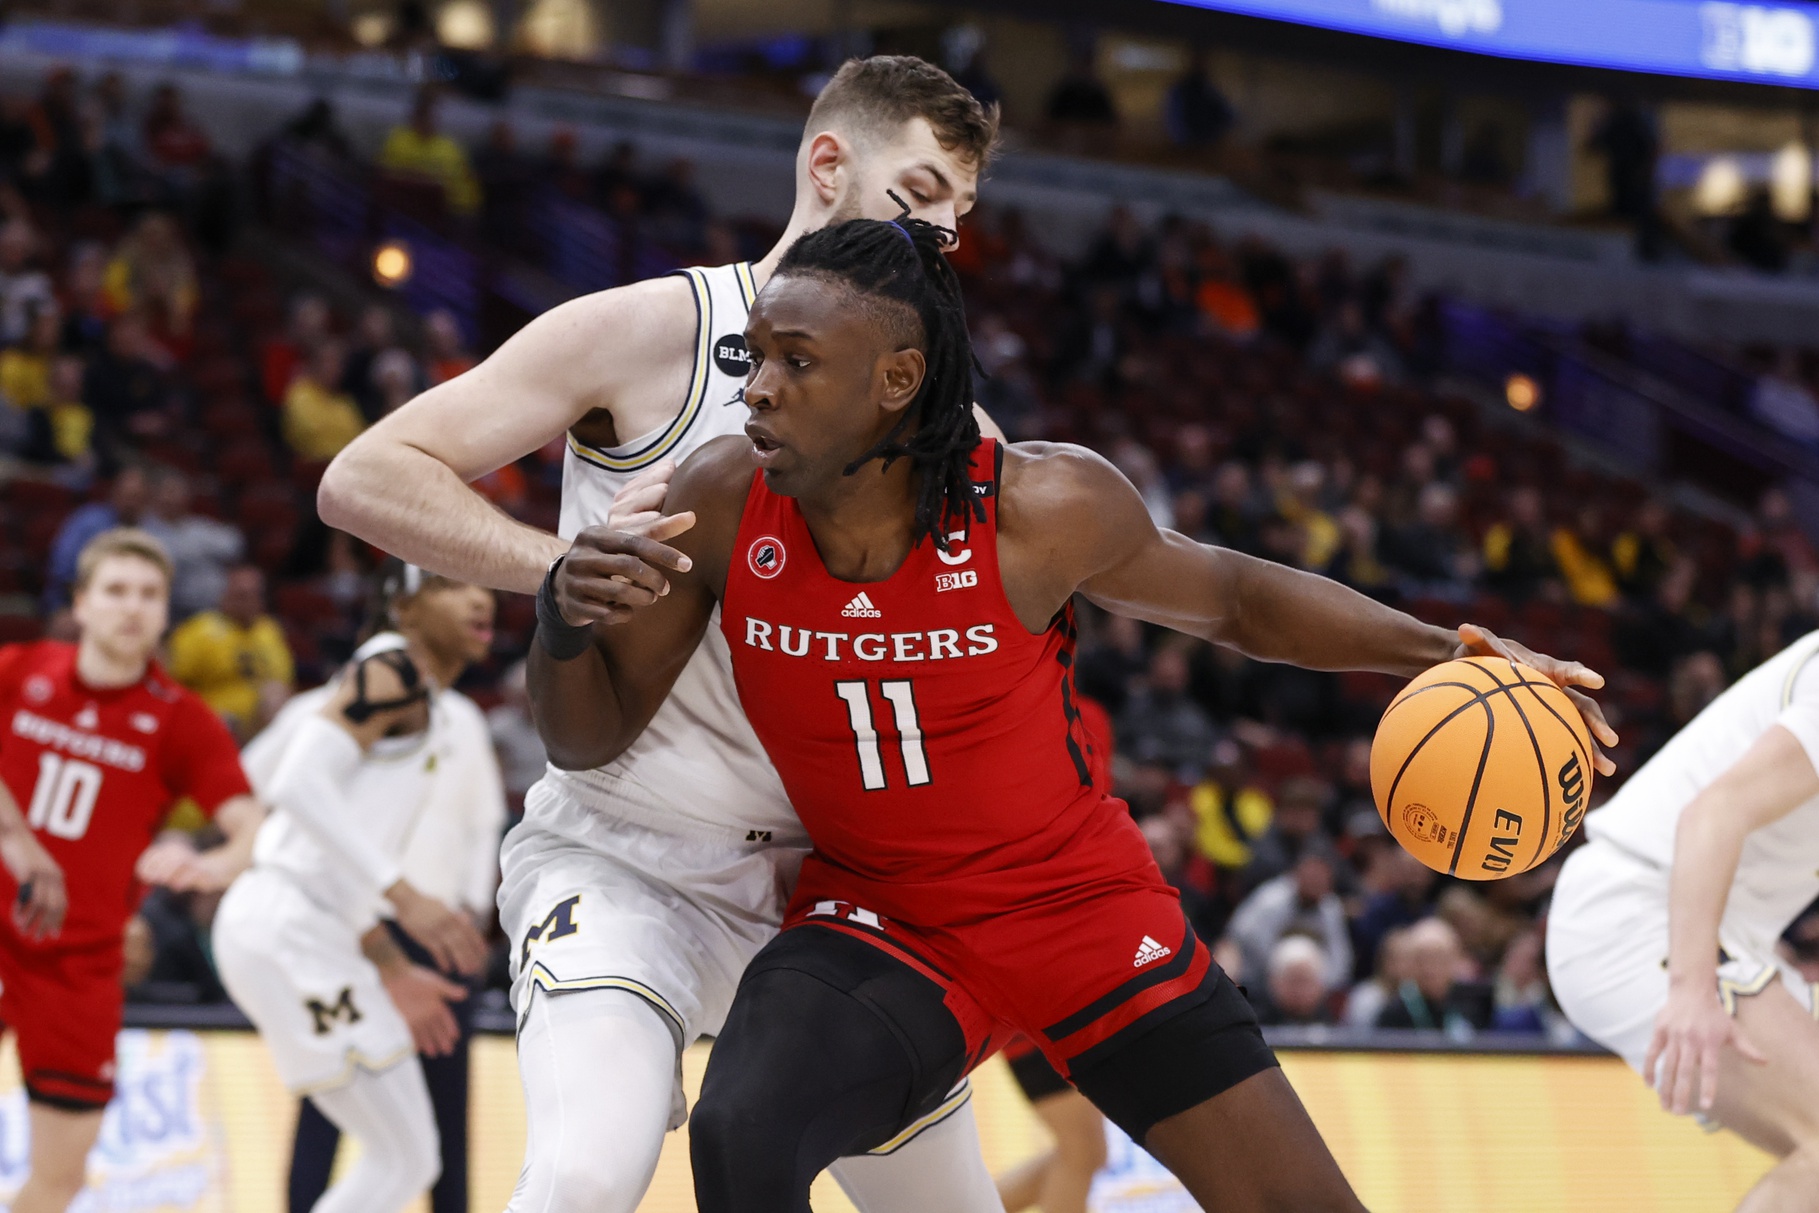 Mar 9, 2023; Chicago, IL, USA; Rutgers Scarlet Knights center Clifford Omoruyi (11) drives to the basket against Michigan Wolverines center Hunter Dickinson (1) during the first half at United Center. Mandatory Credit: Kamil Krzaczynski-USA TODAY Sports